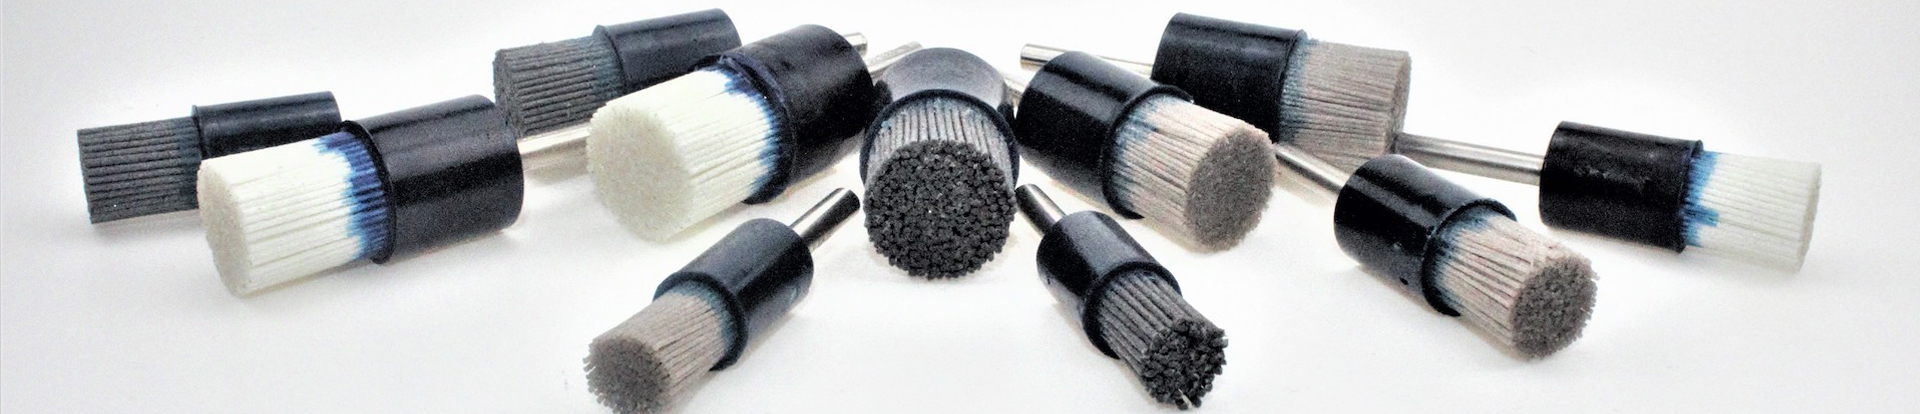 Brushes For Cleaning and Dust Extraction